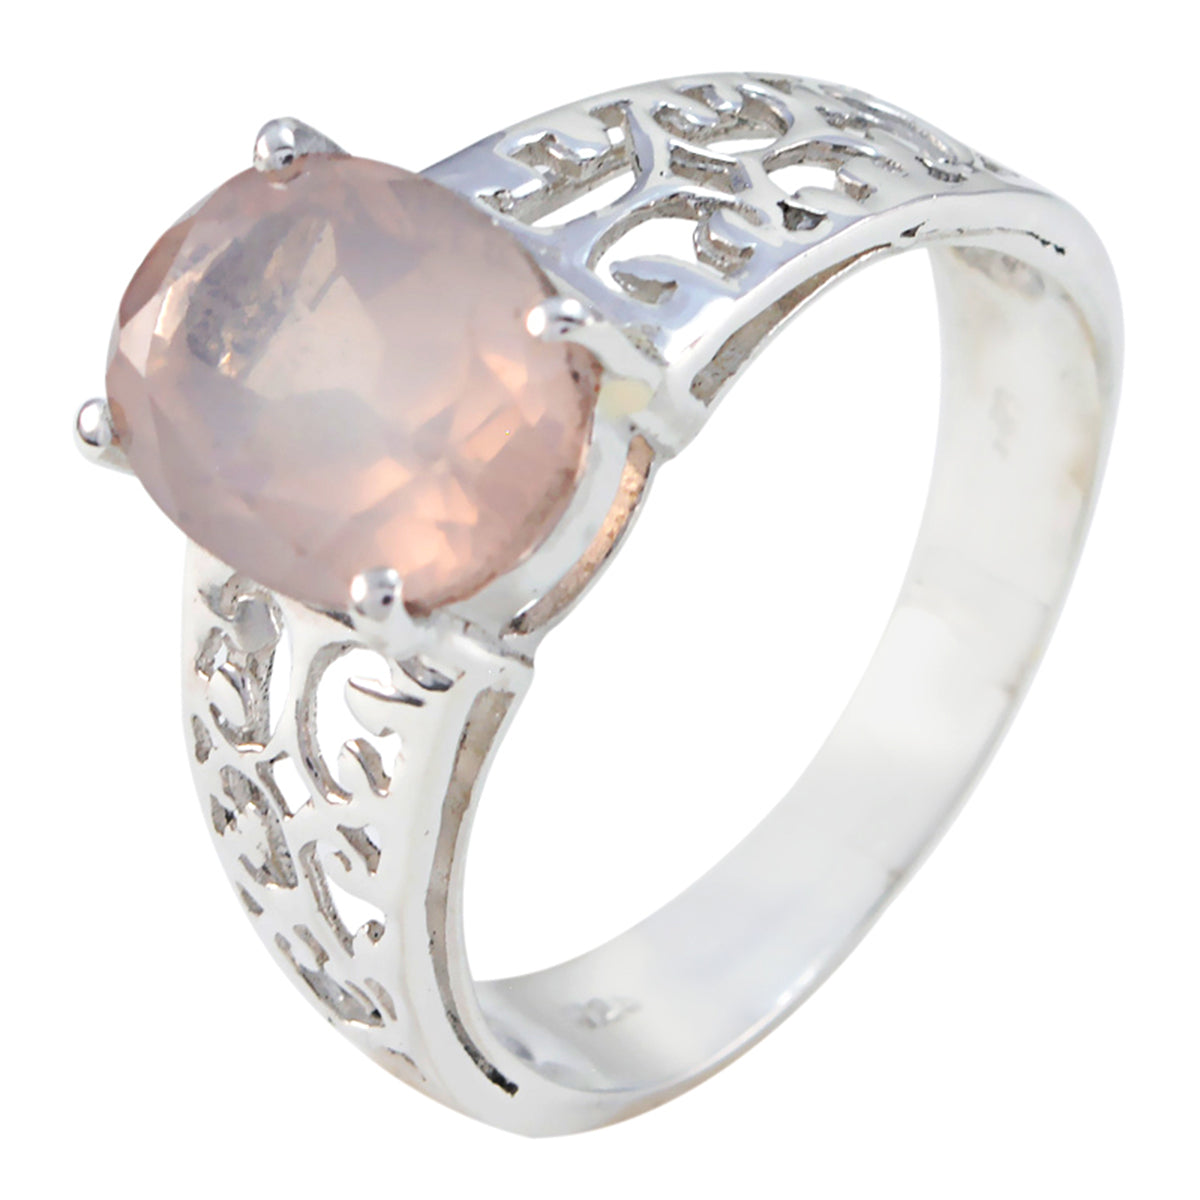 Goods Gemstone Rose Quartz 925 Sterling Silver Rings Initial Jewelry